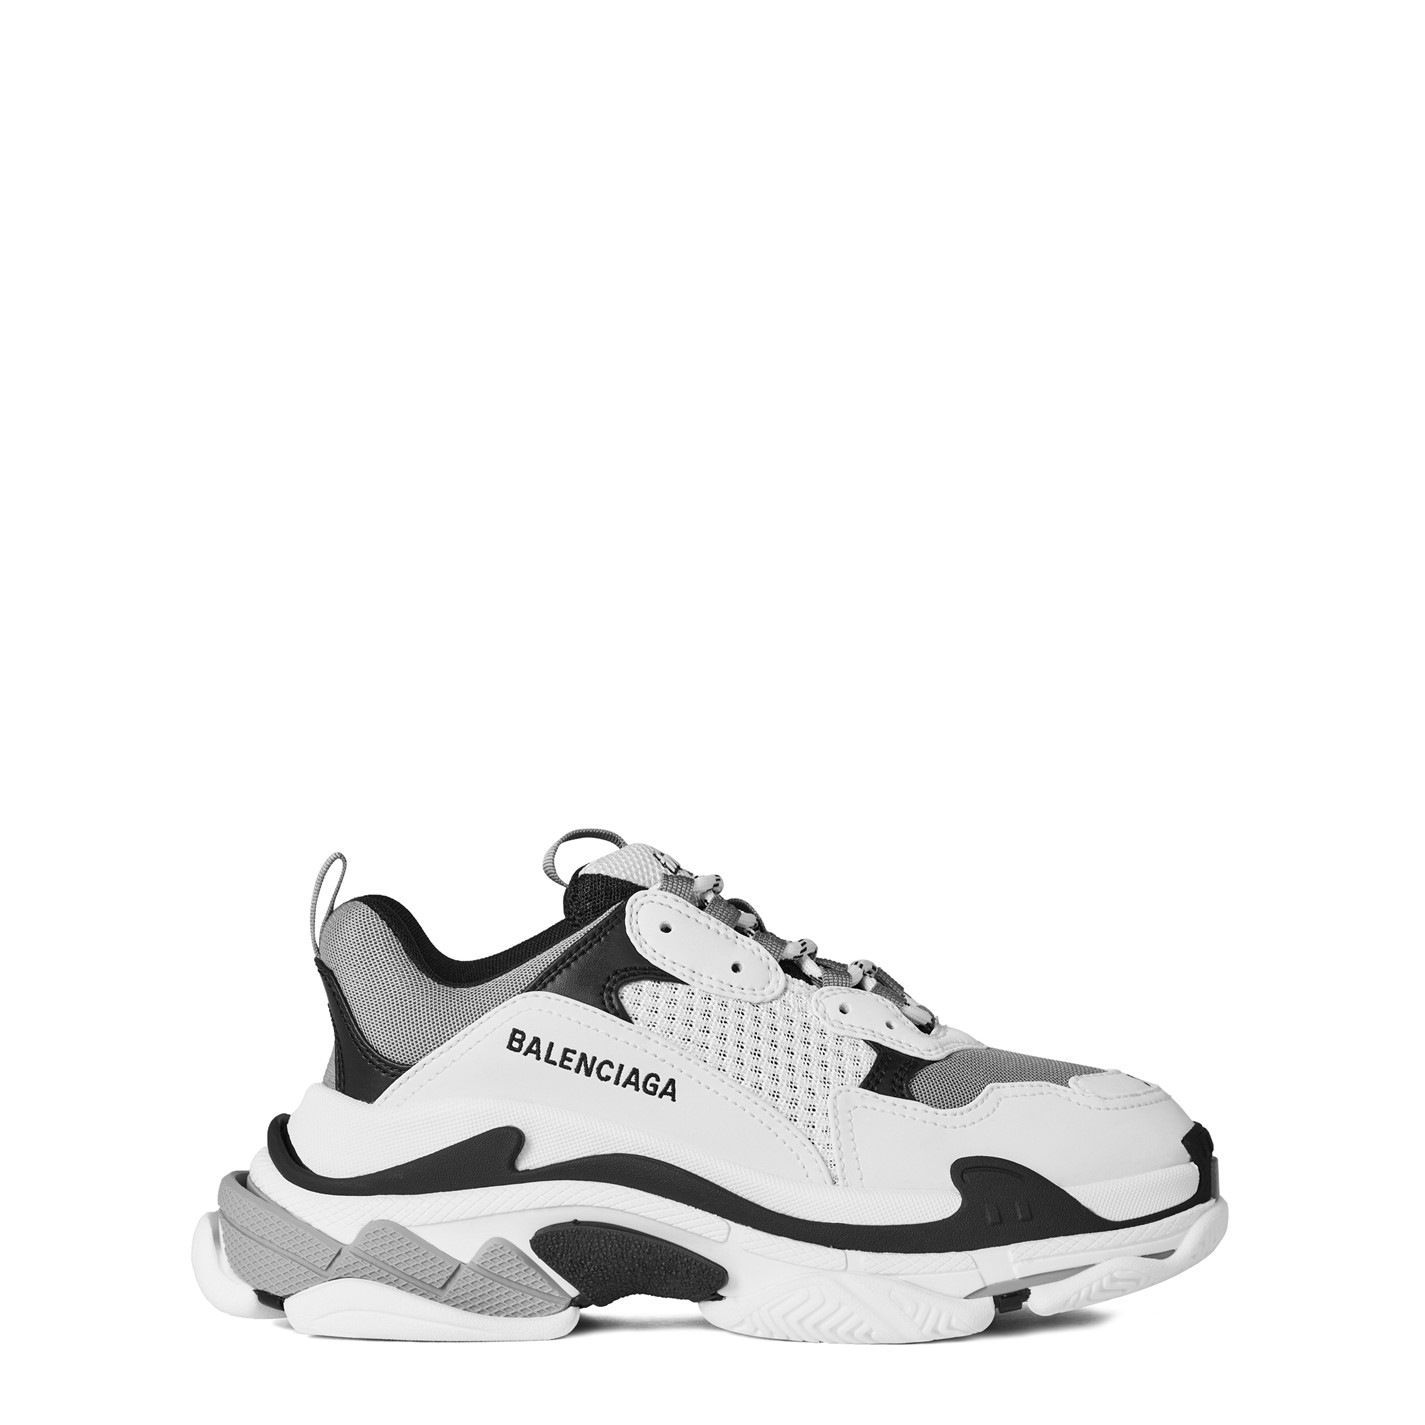 Balenciaga | Promotions | All Trainers | Page 2 - Get The Label